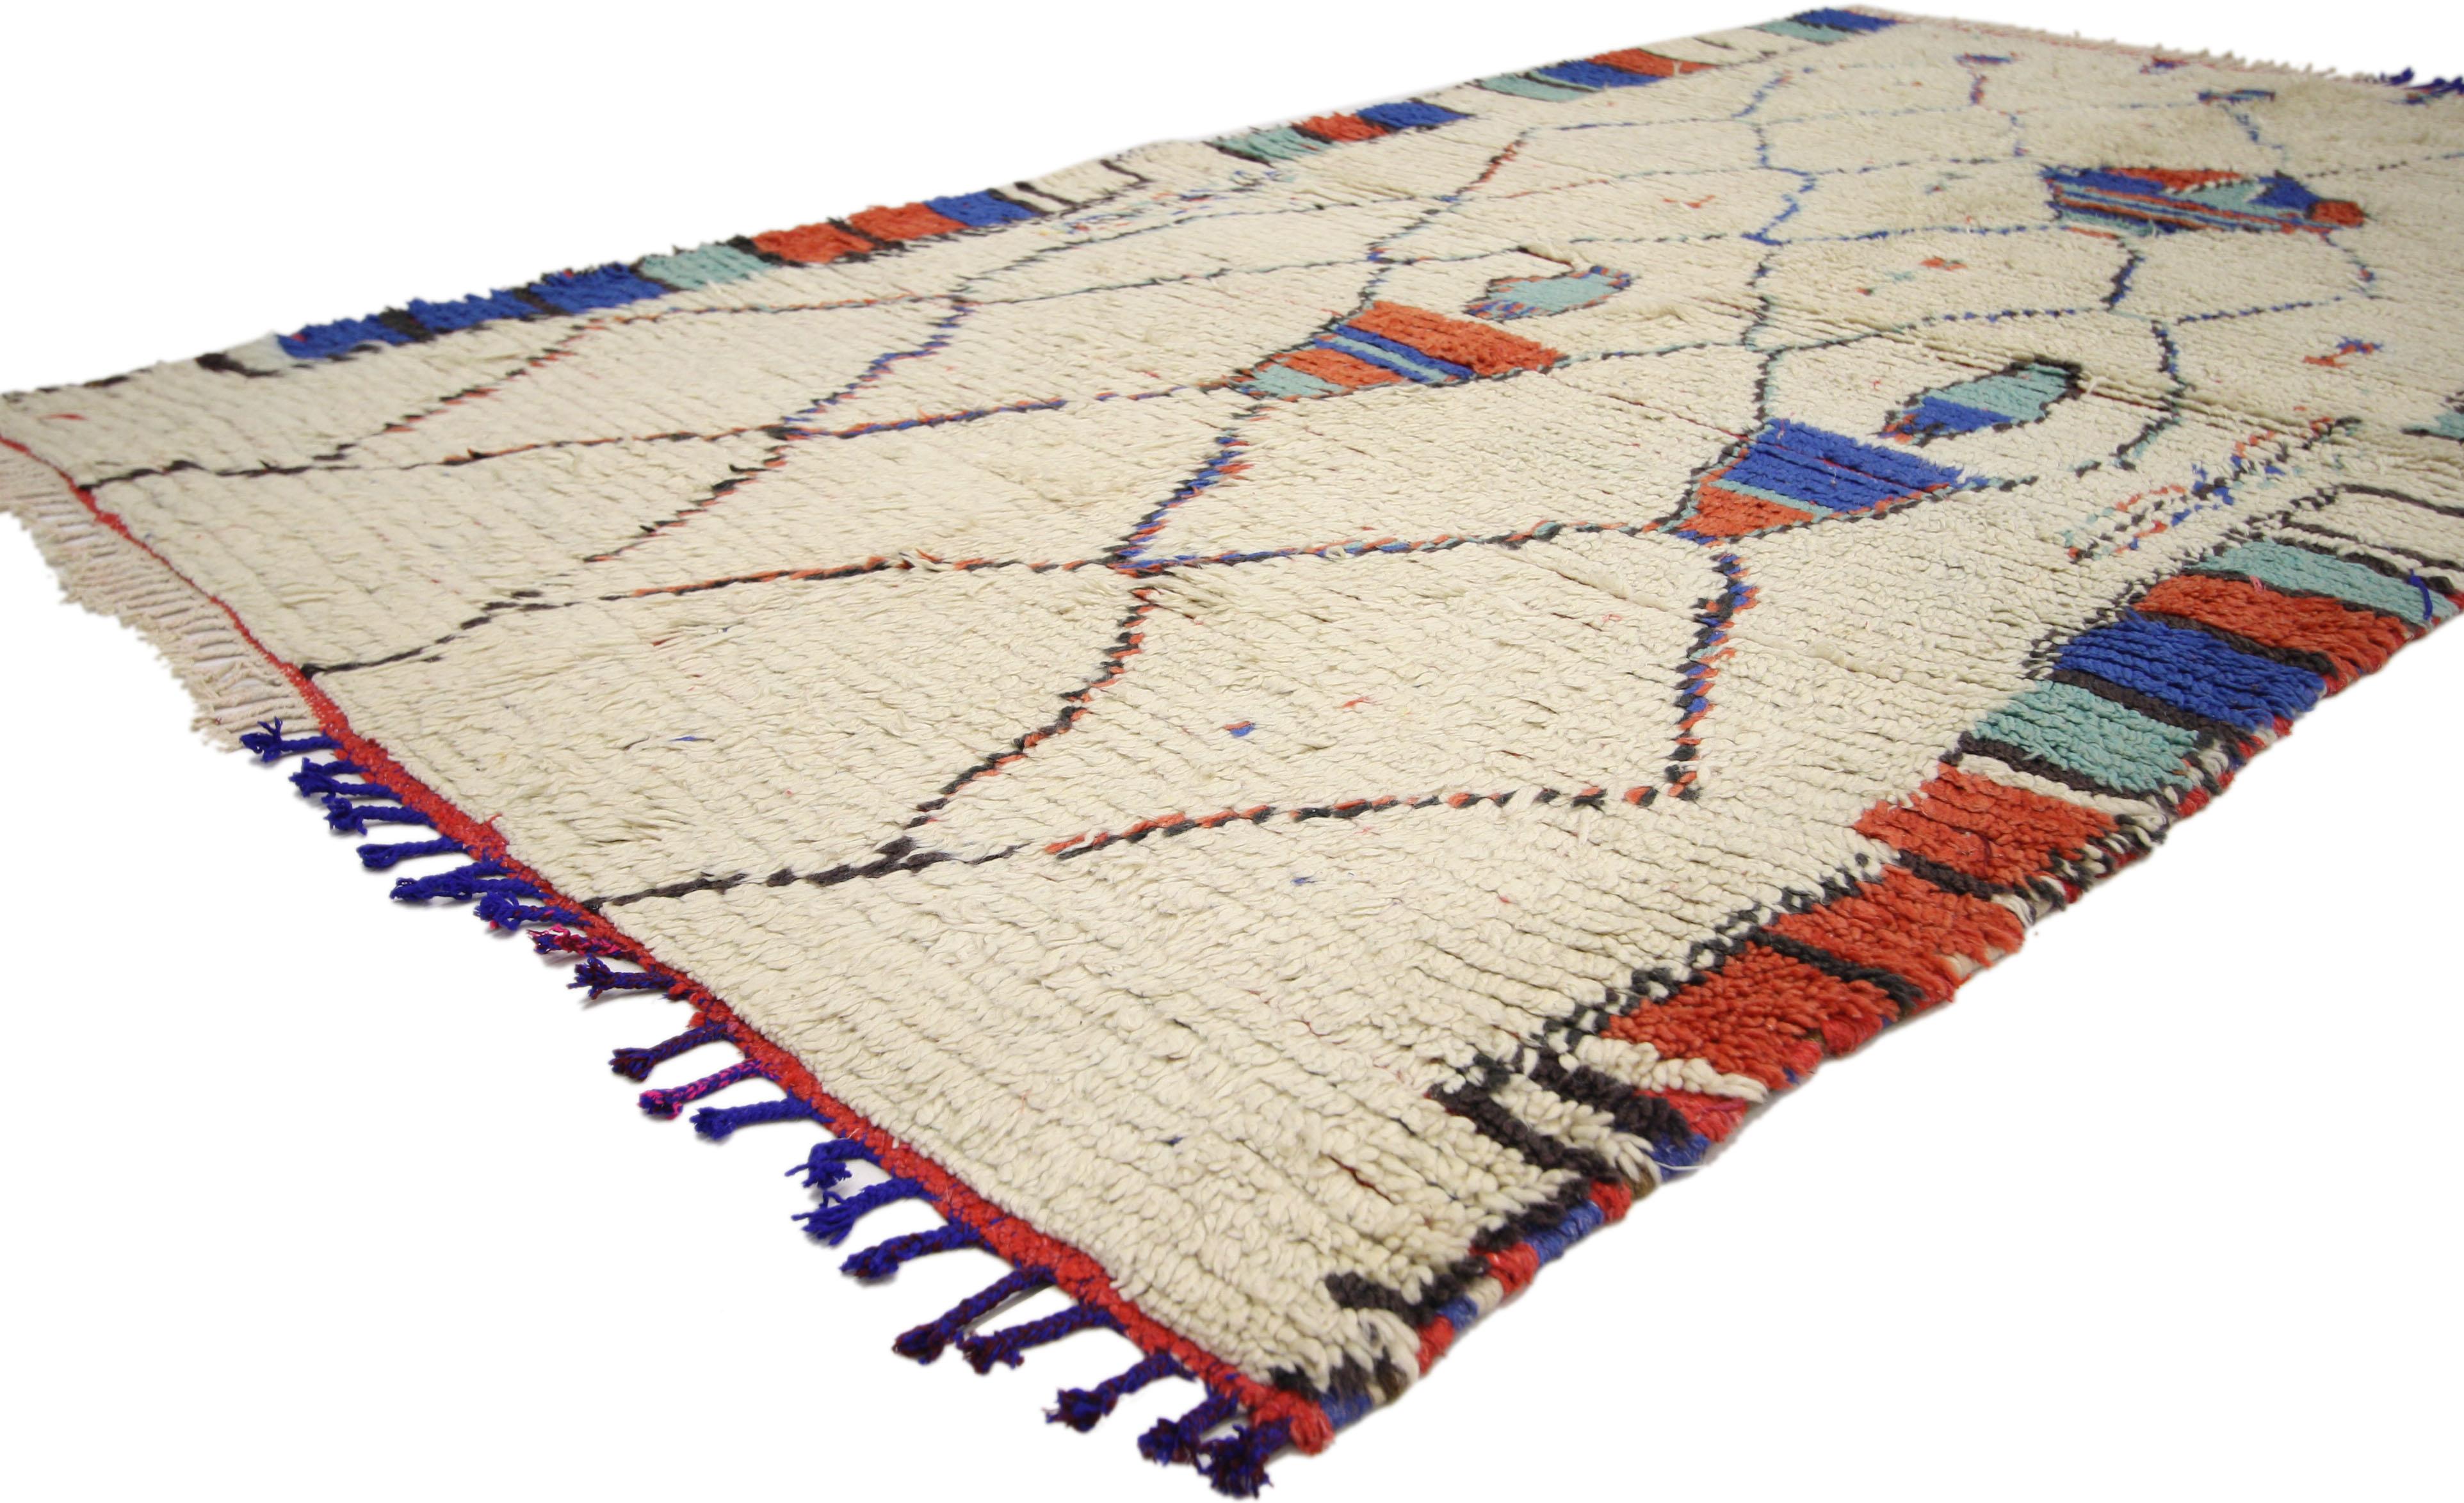 74433 Vintage Moroccan Rug, Berber Moroccan Azilal Tribal Rug. Transform nearly any room into a Moroccan delight with this hand-knotted wool vintage Moroccan rug. Rendered in variegated shades of red, blue, teal and persimmon on a field of